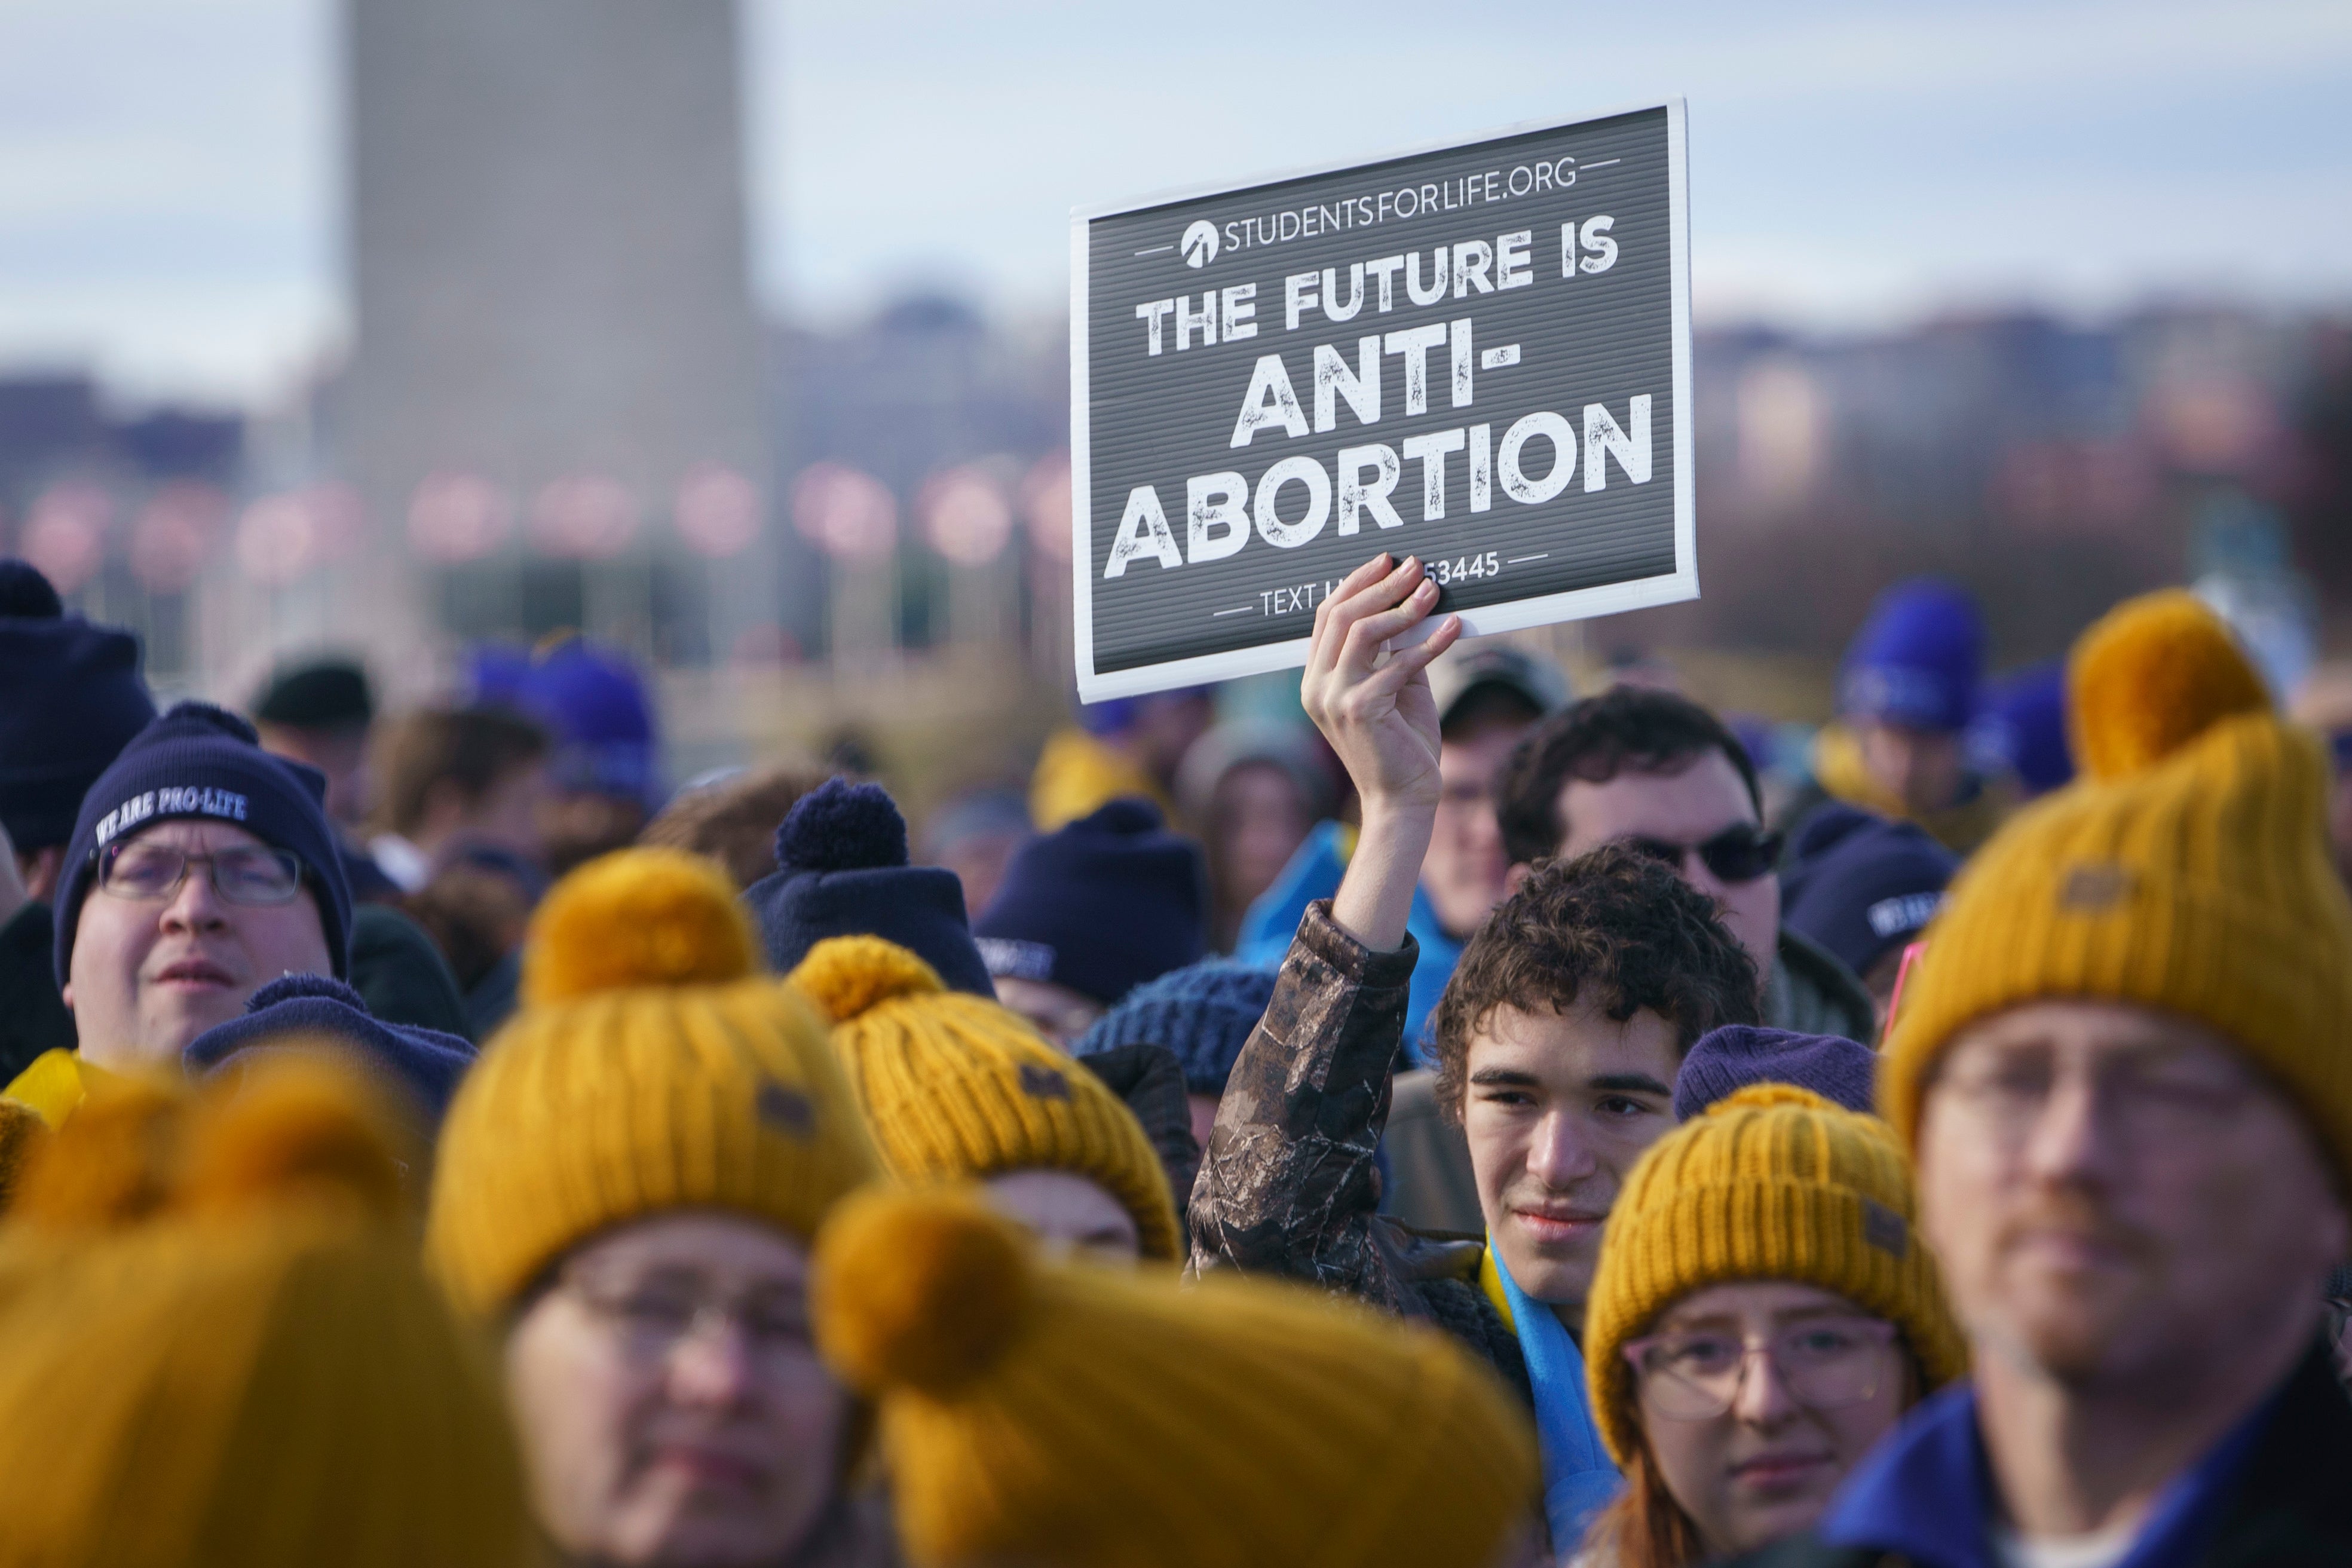 A photo of people wearing yellow hats, with a young man behind them holding a sign that reads: "The Future Is Anti-Abortion."